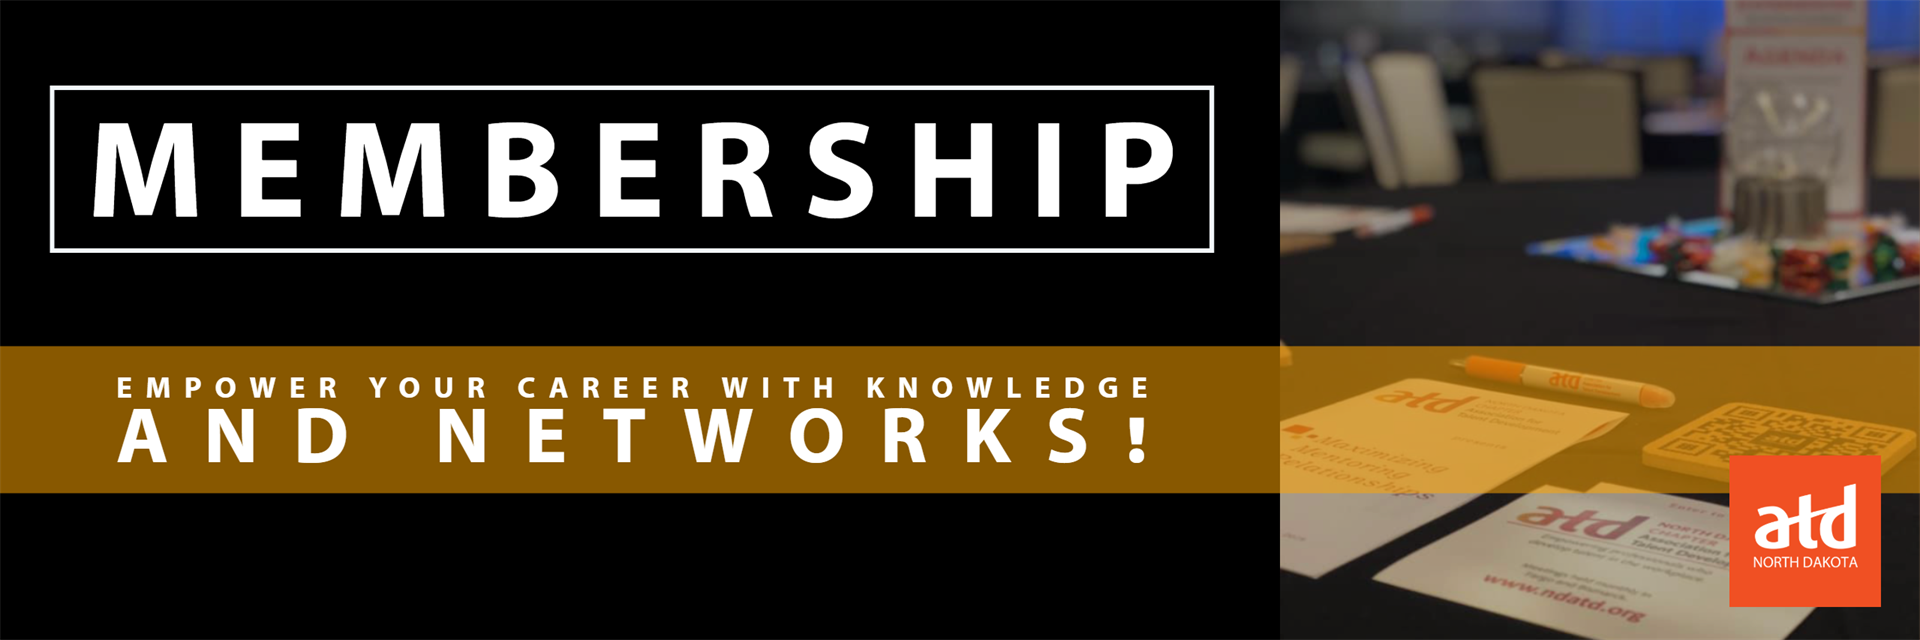 Header image. Membership. Empower your career with knowledge and networks.